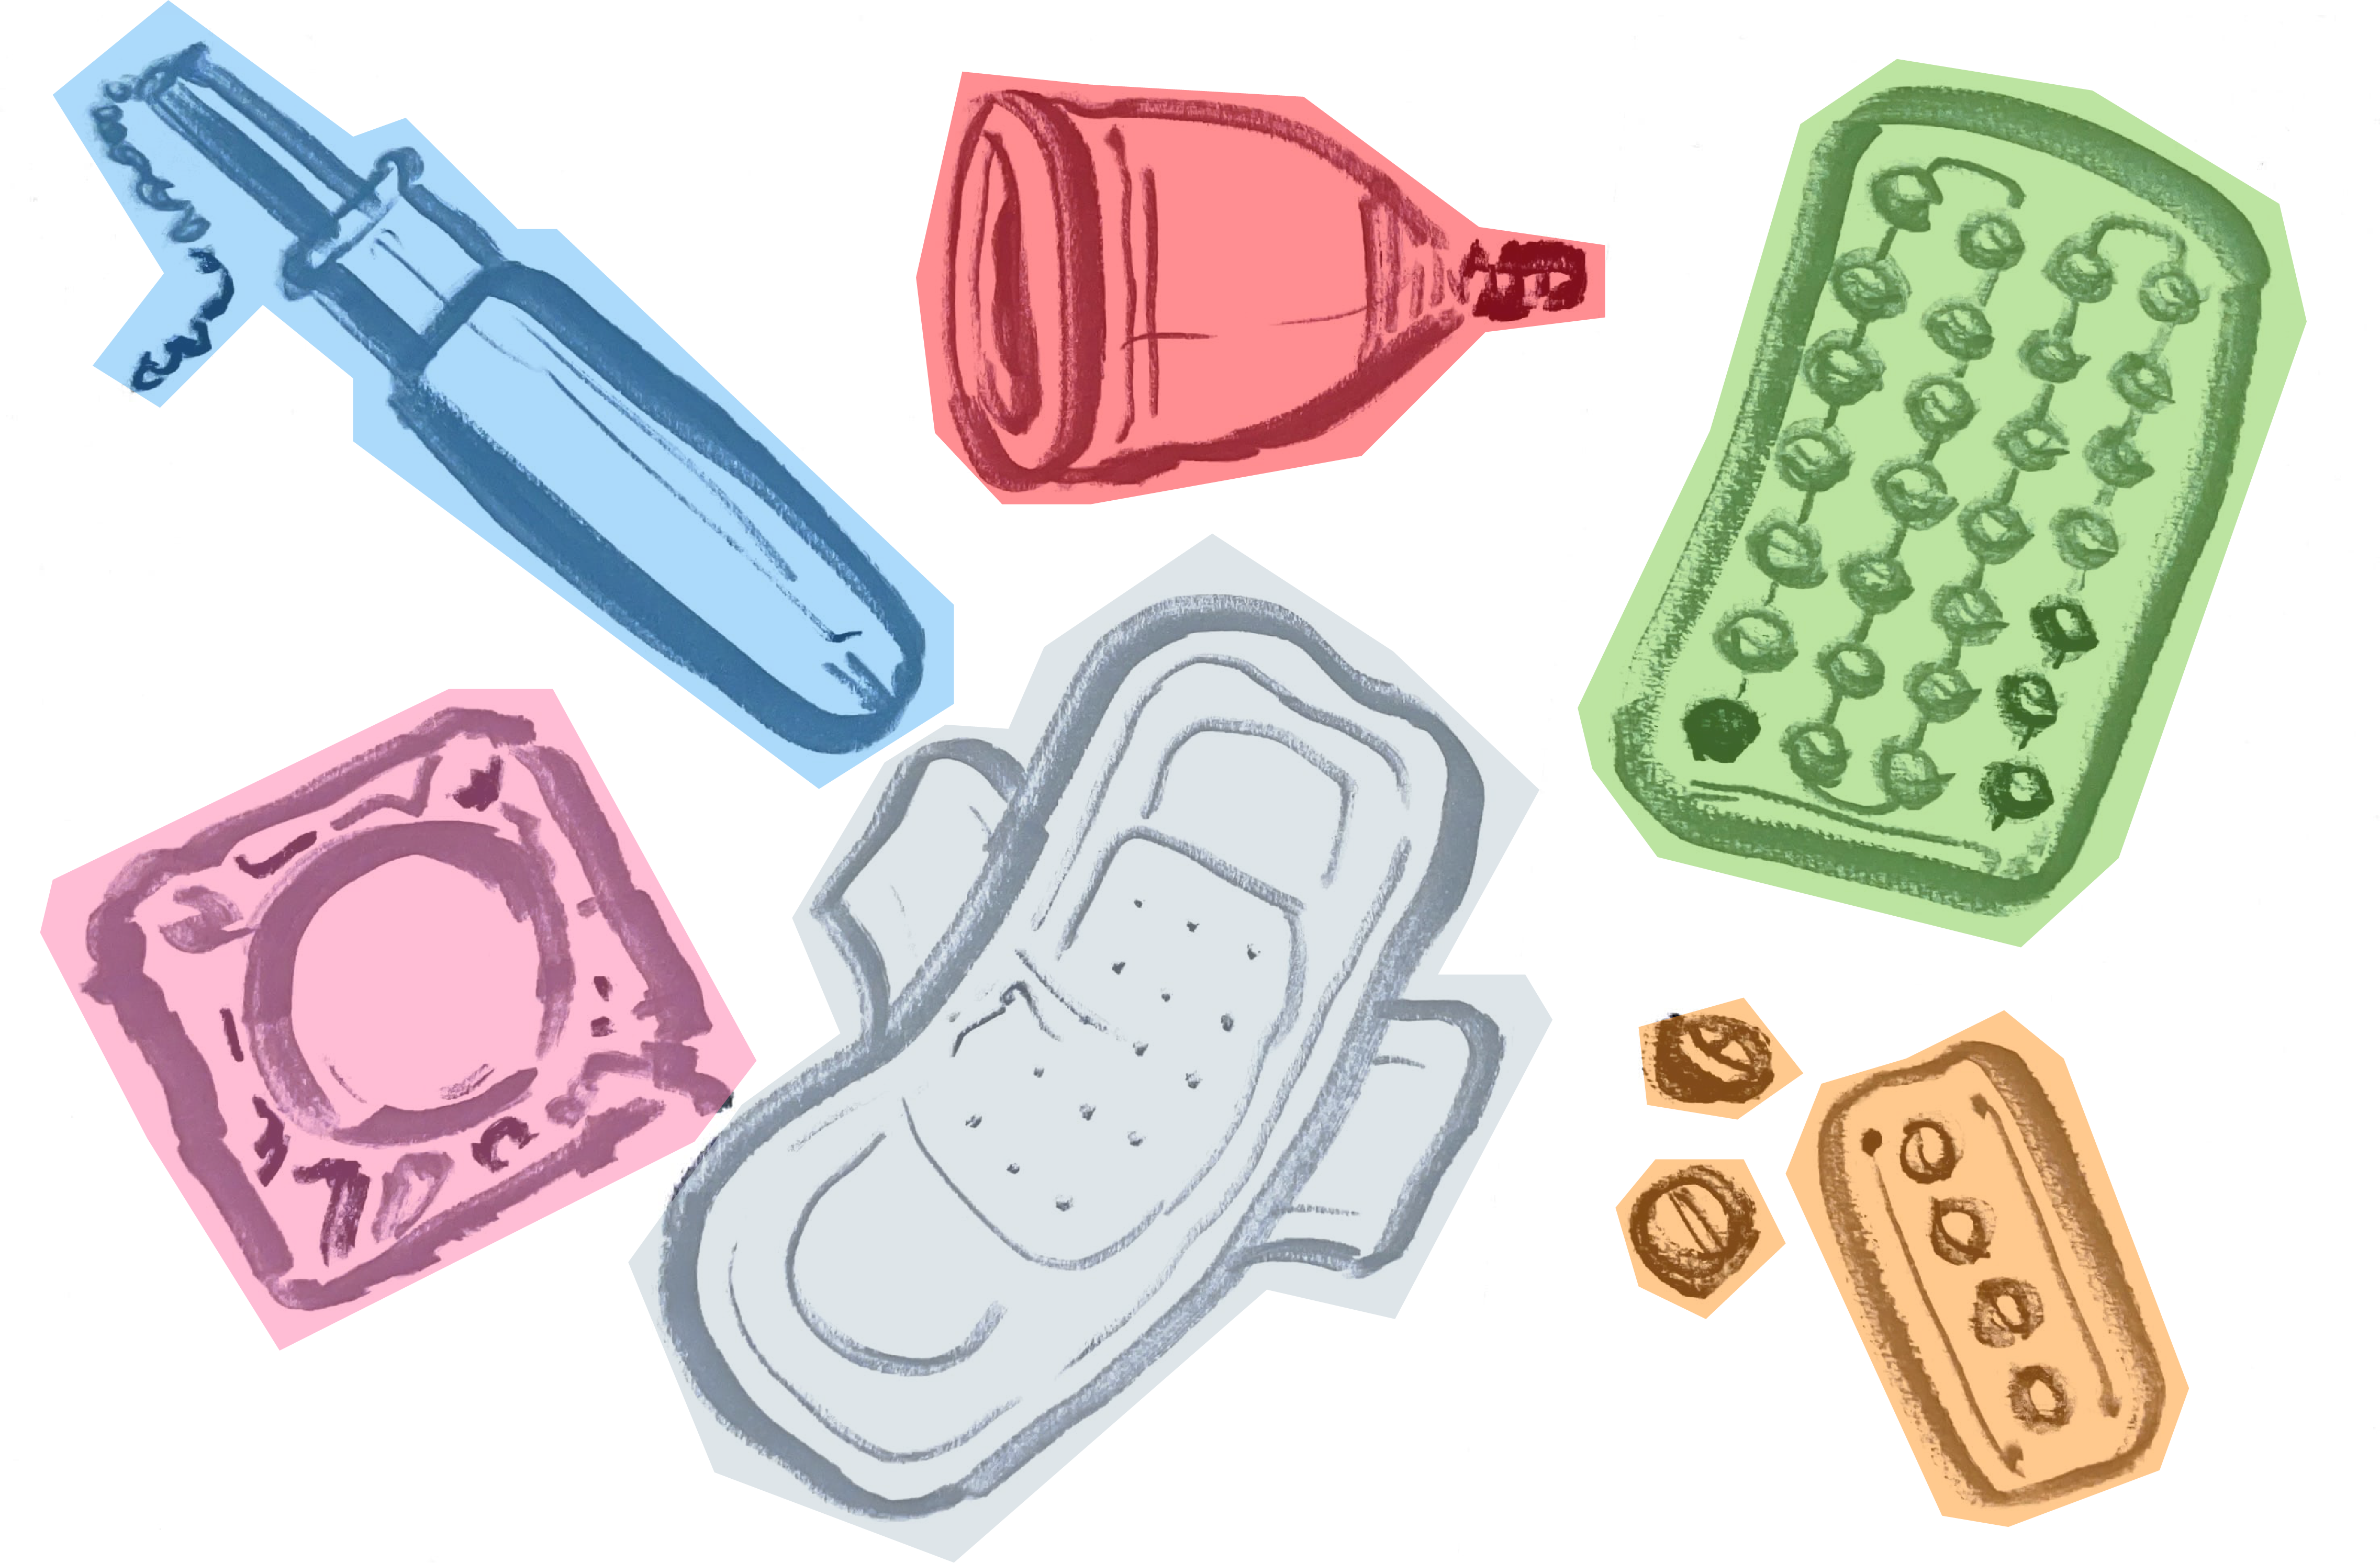 An illustration of multi-colored menstrual and birth control products